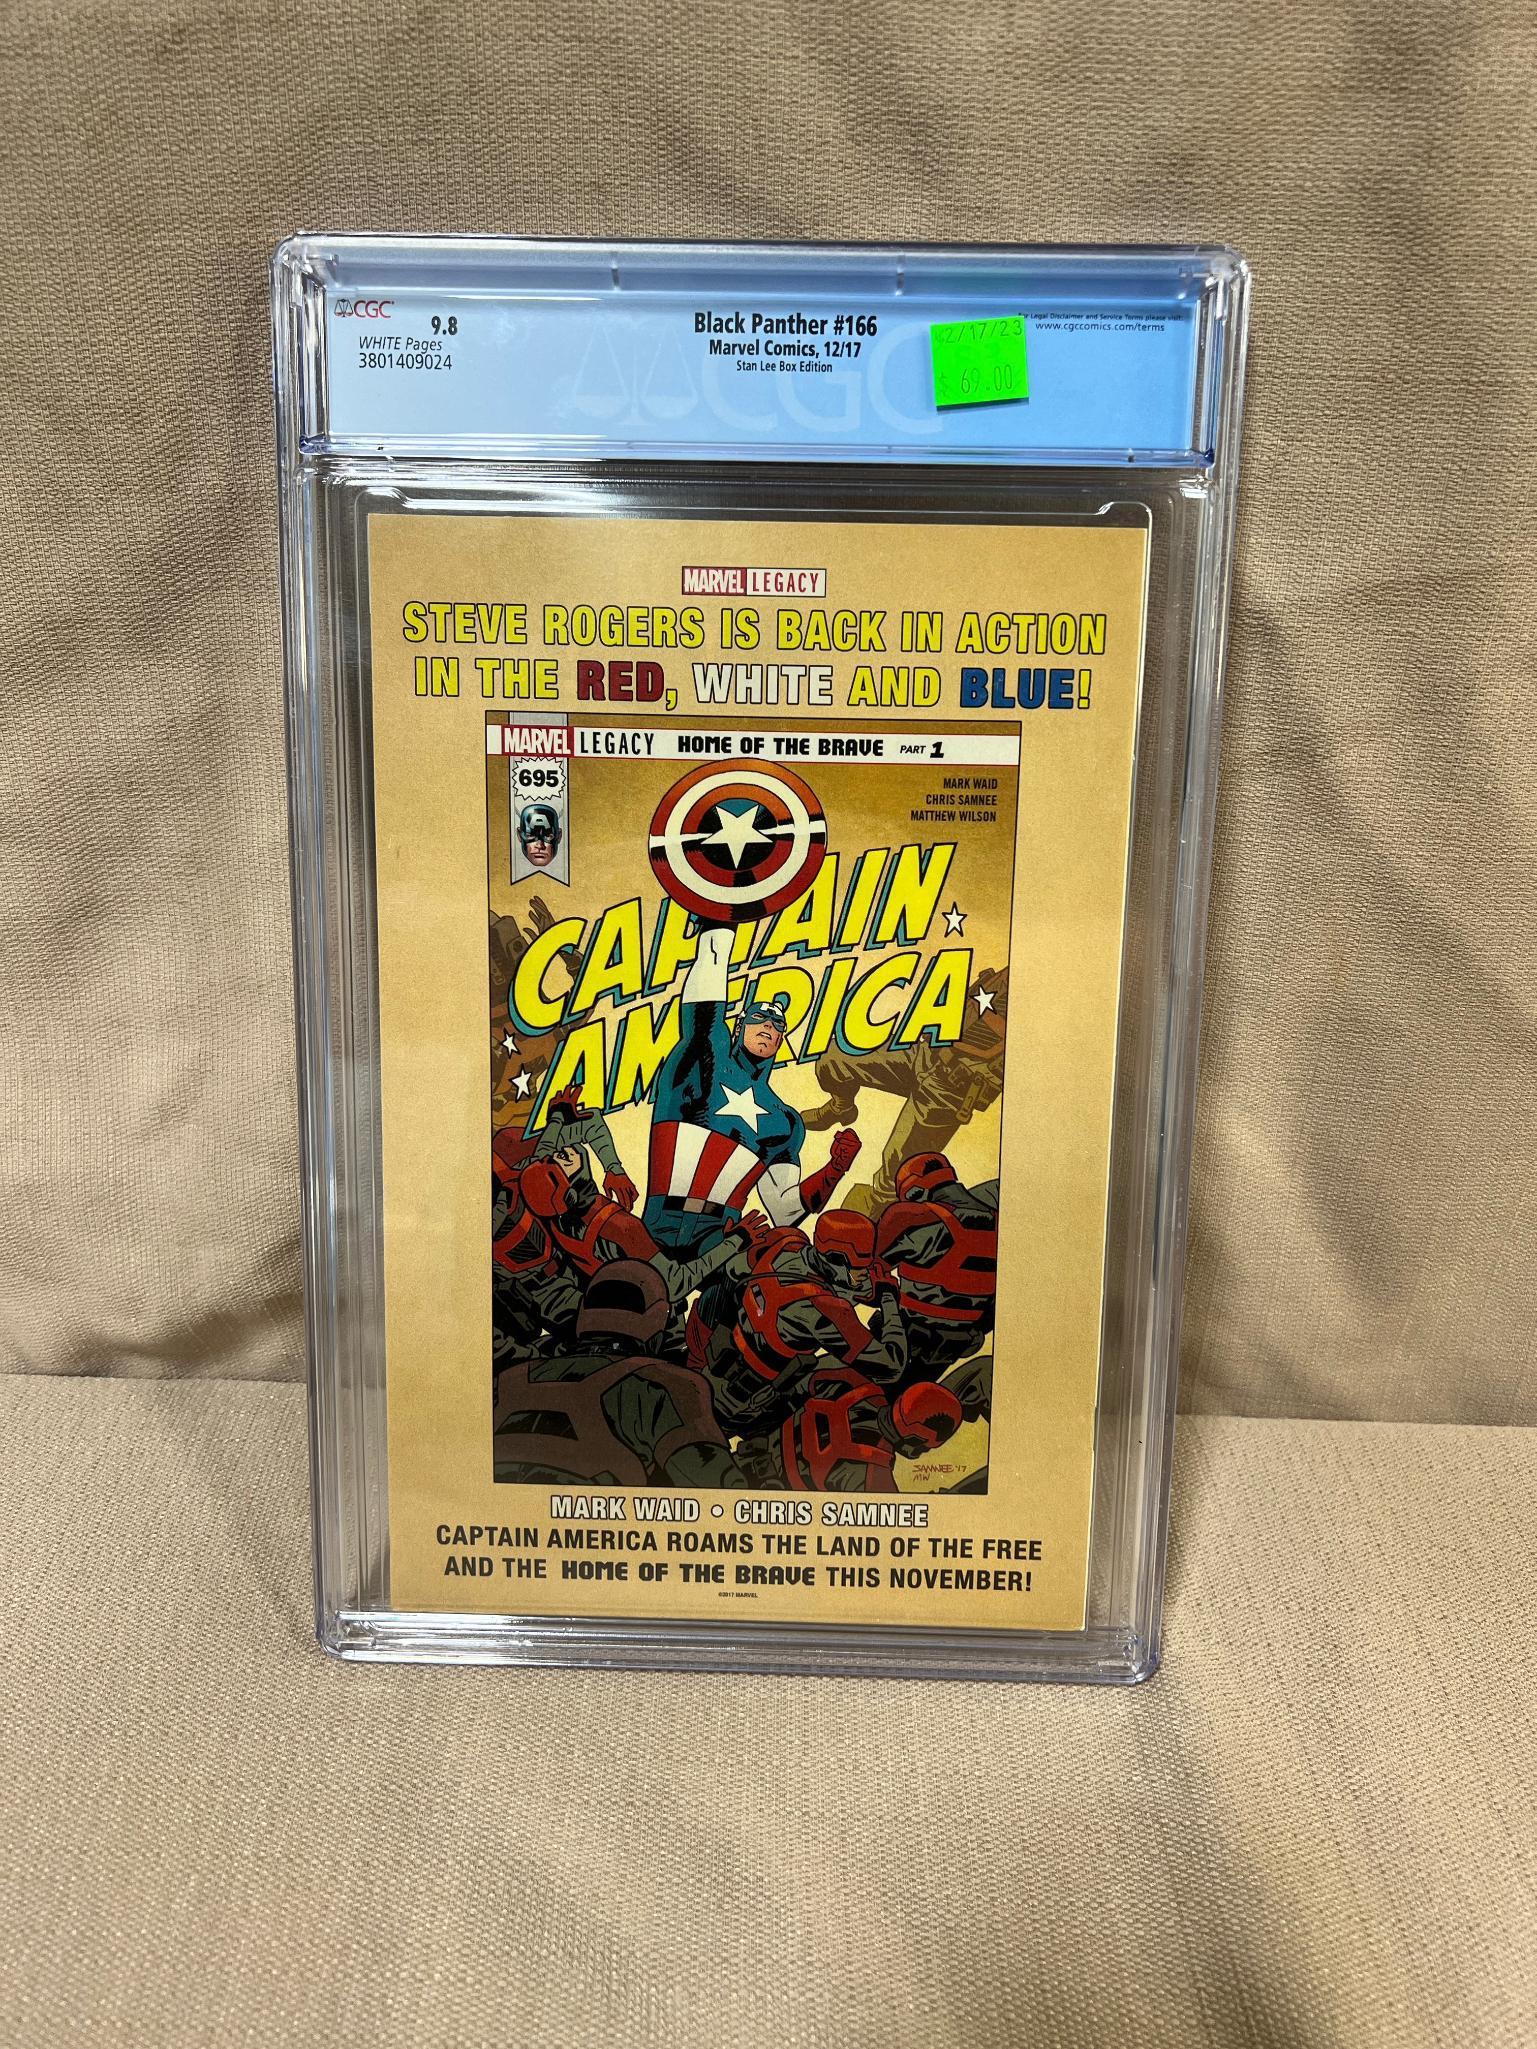 AUCTION SPOTLIGHT! Black Panther #166 Stan Lee Box Edition graded 9.8 in CGC holder